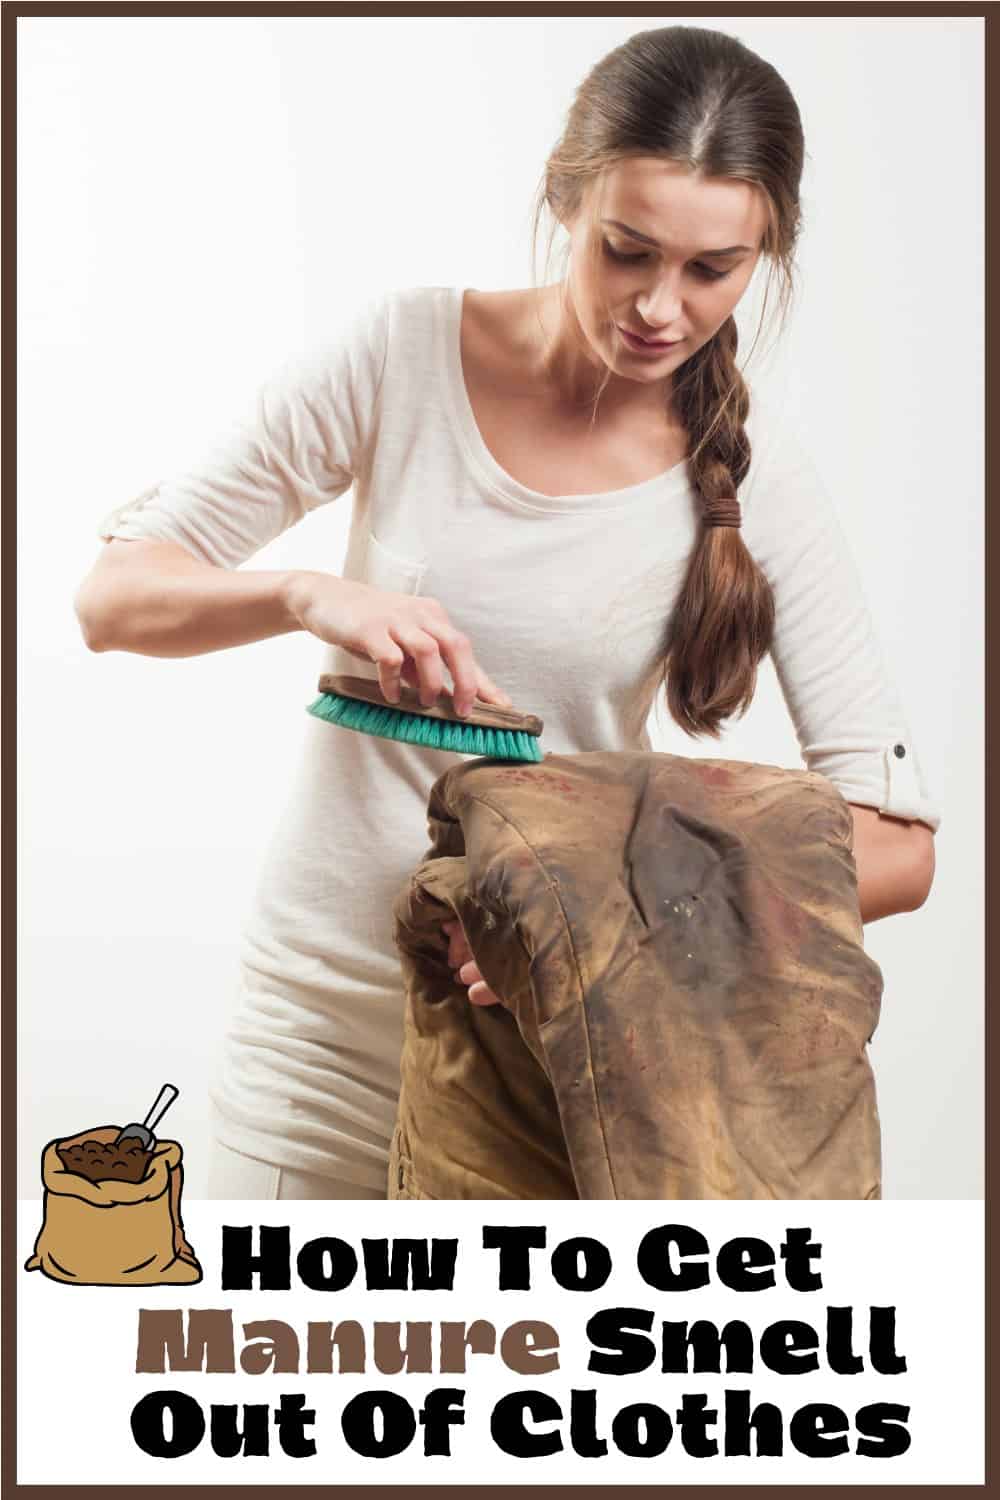 Follow These Steps To Remove Manure Smell From Clothes